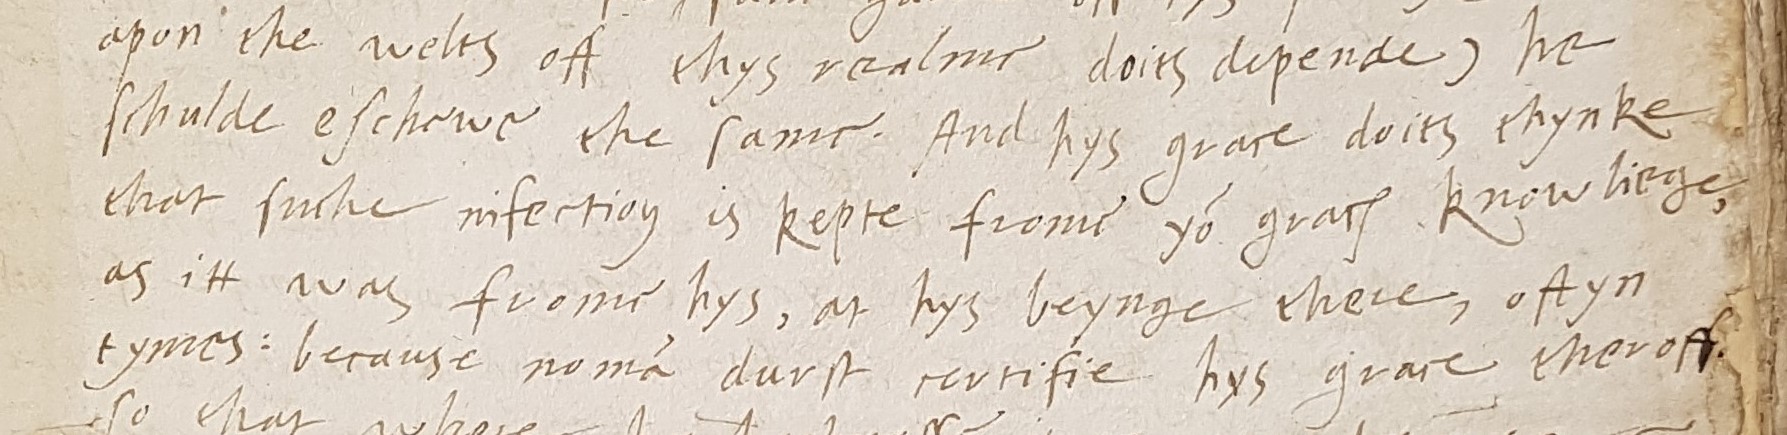 “And his grace doth think that such infection is kept from your grace’s knowledge as it was from his, at his being there, often times” - correspondence between King Henry VIII's advisers, written from Richard Pace to Thomas Wolsey, 6 April 1518. (The National Archives)